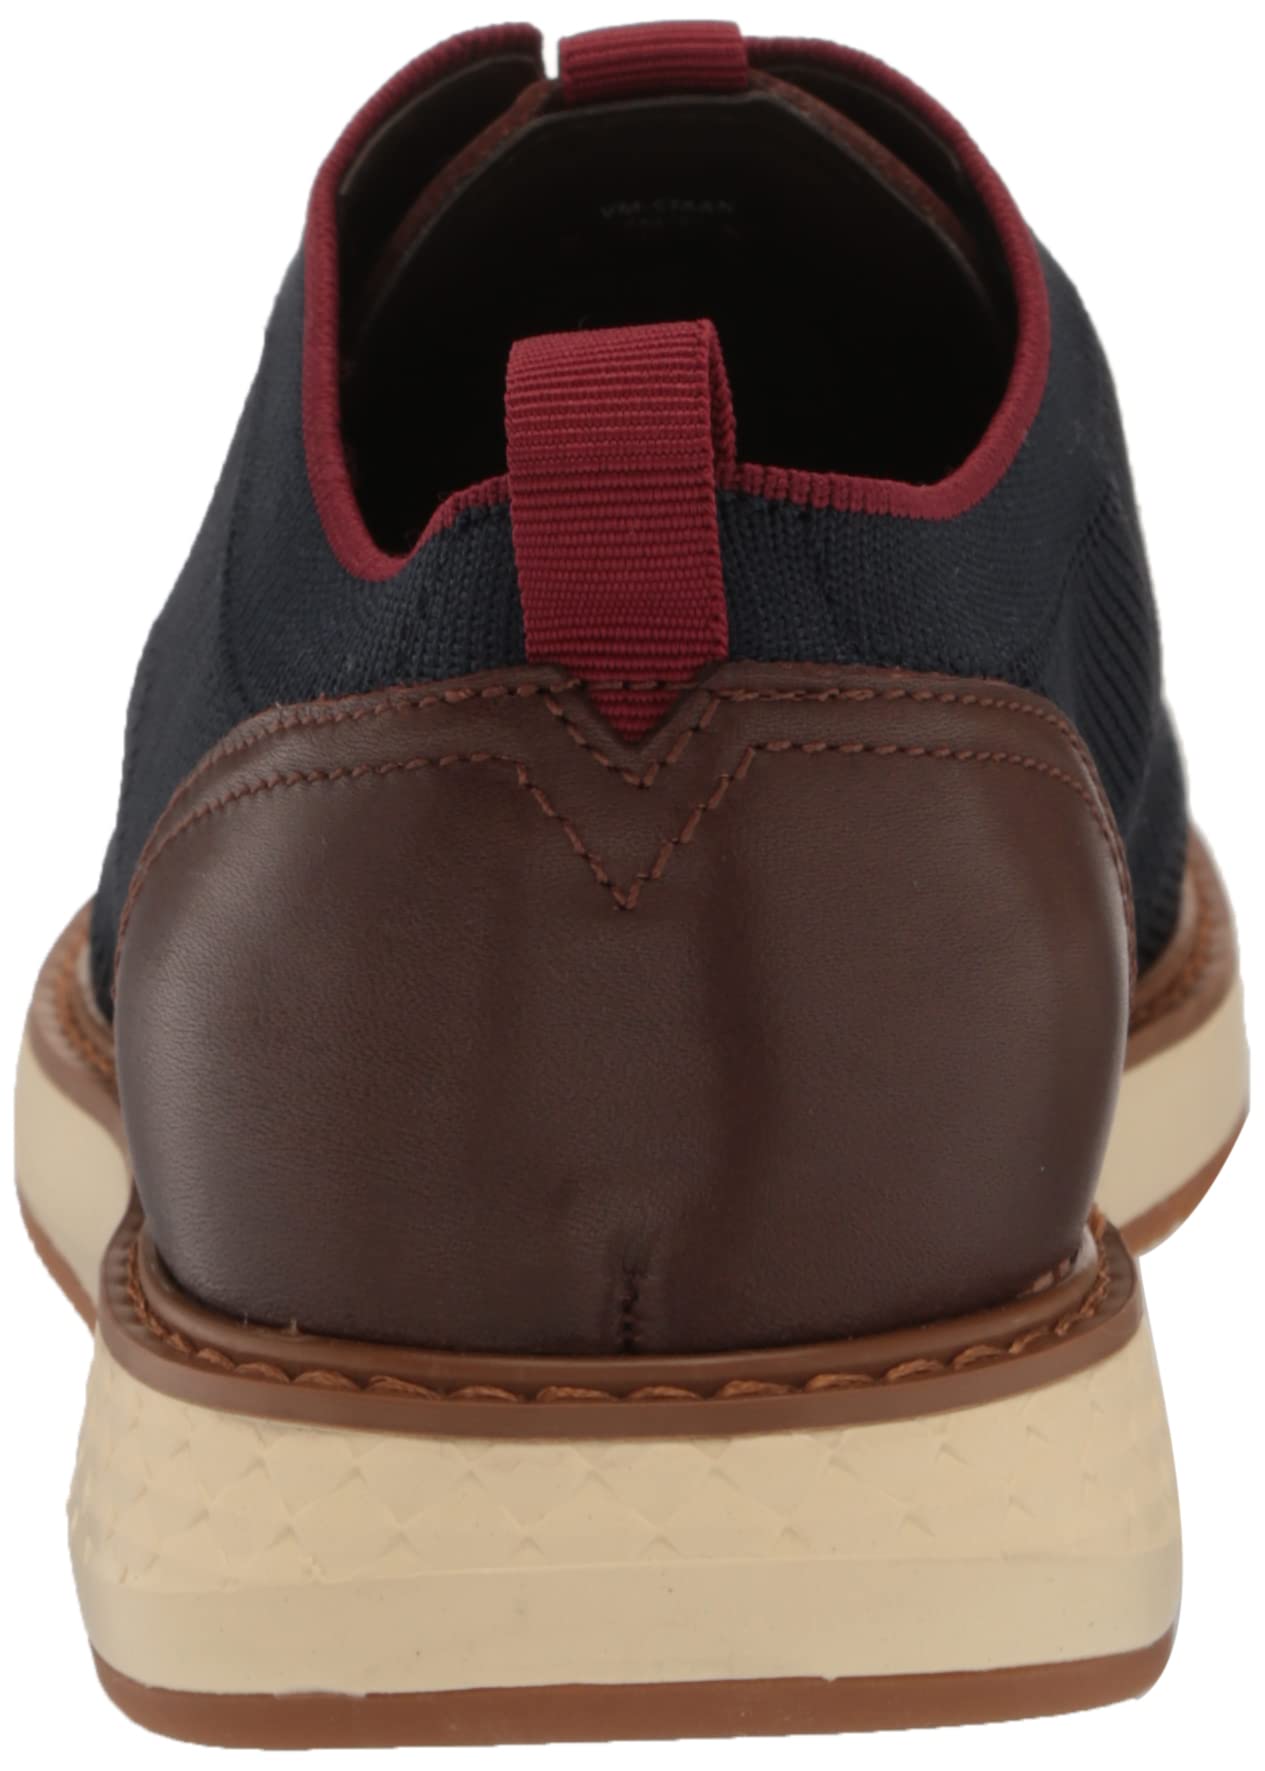 Vince Camuto Men's Staan Casual Oxford